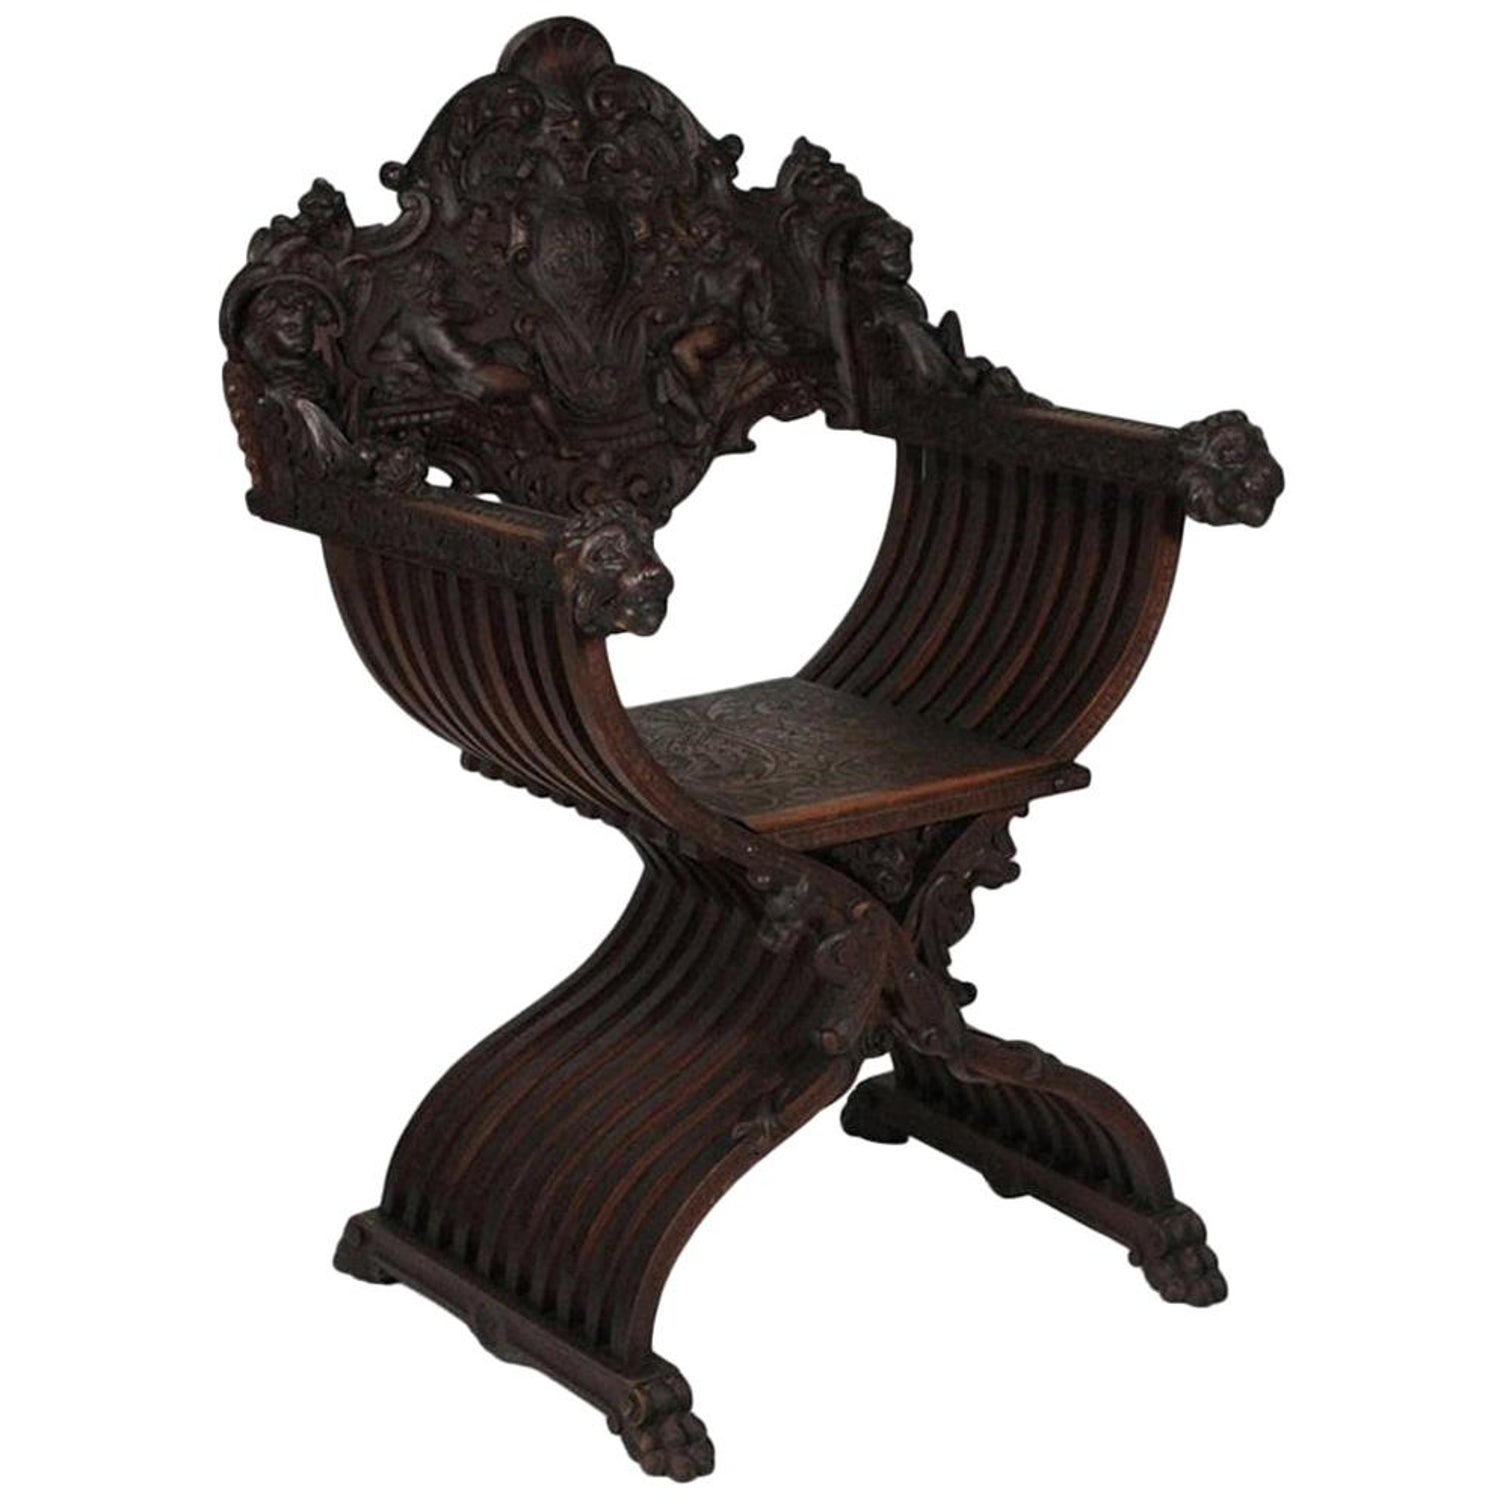 https://a.1stdibscdn.com/heavily-carved-figural-campaign-chair-lions-cherubs-dragons-circa-1890-for-sale/1121189/f_233323821618280658135/23332382_master.jpg?width=1500